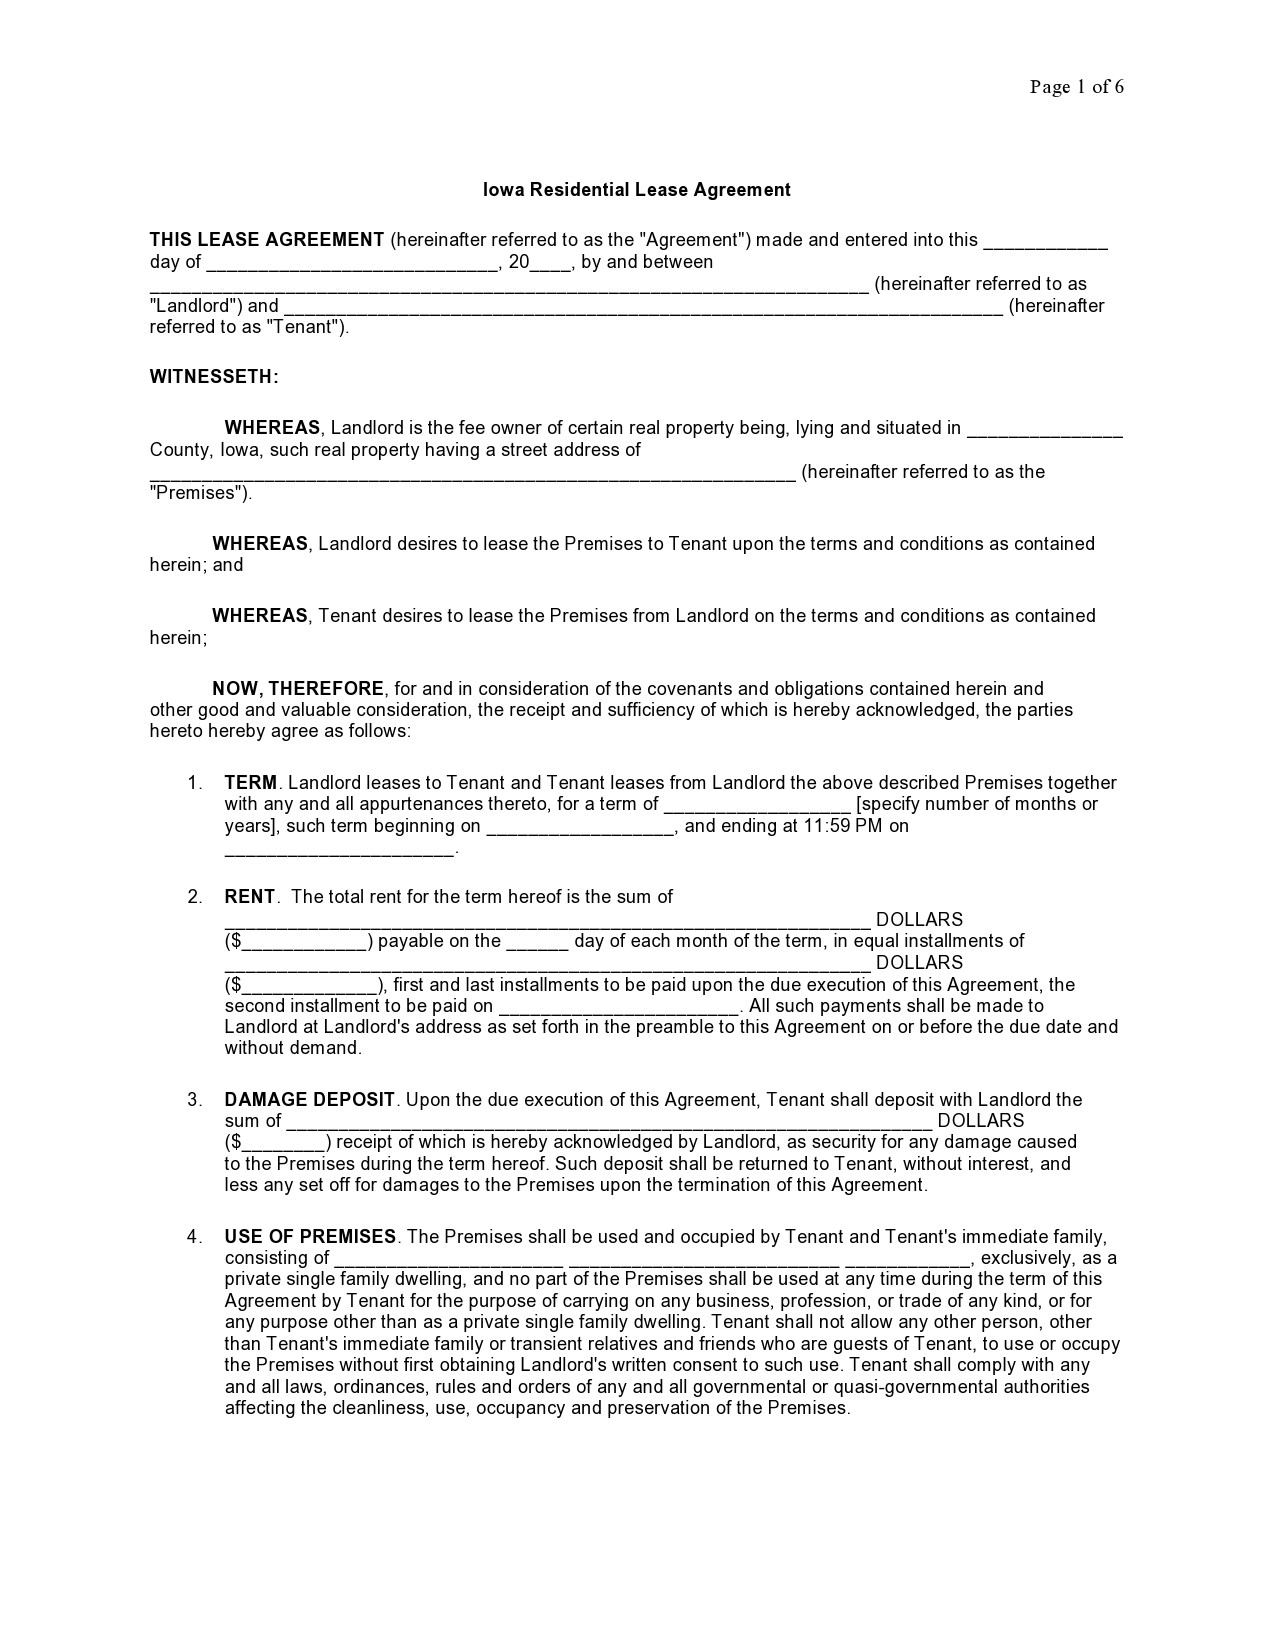 Free residential lease agreement 31